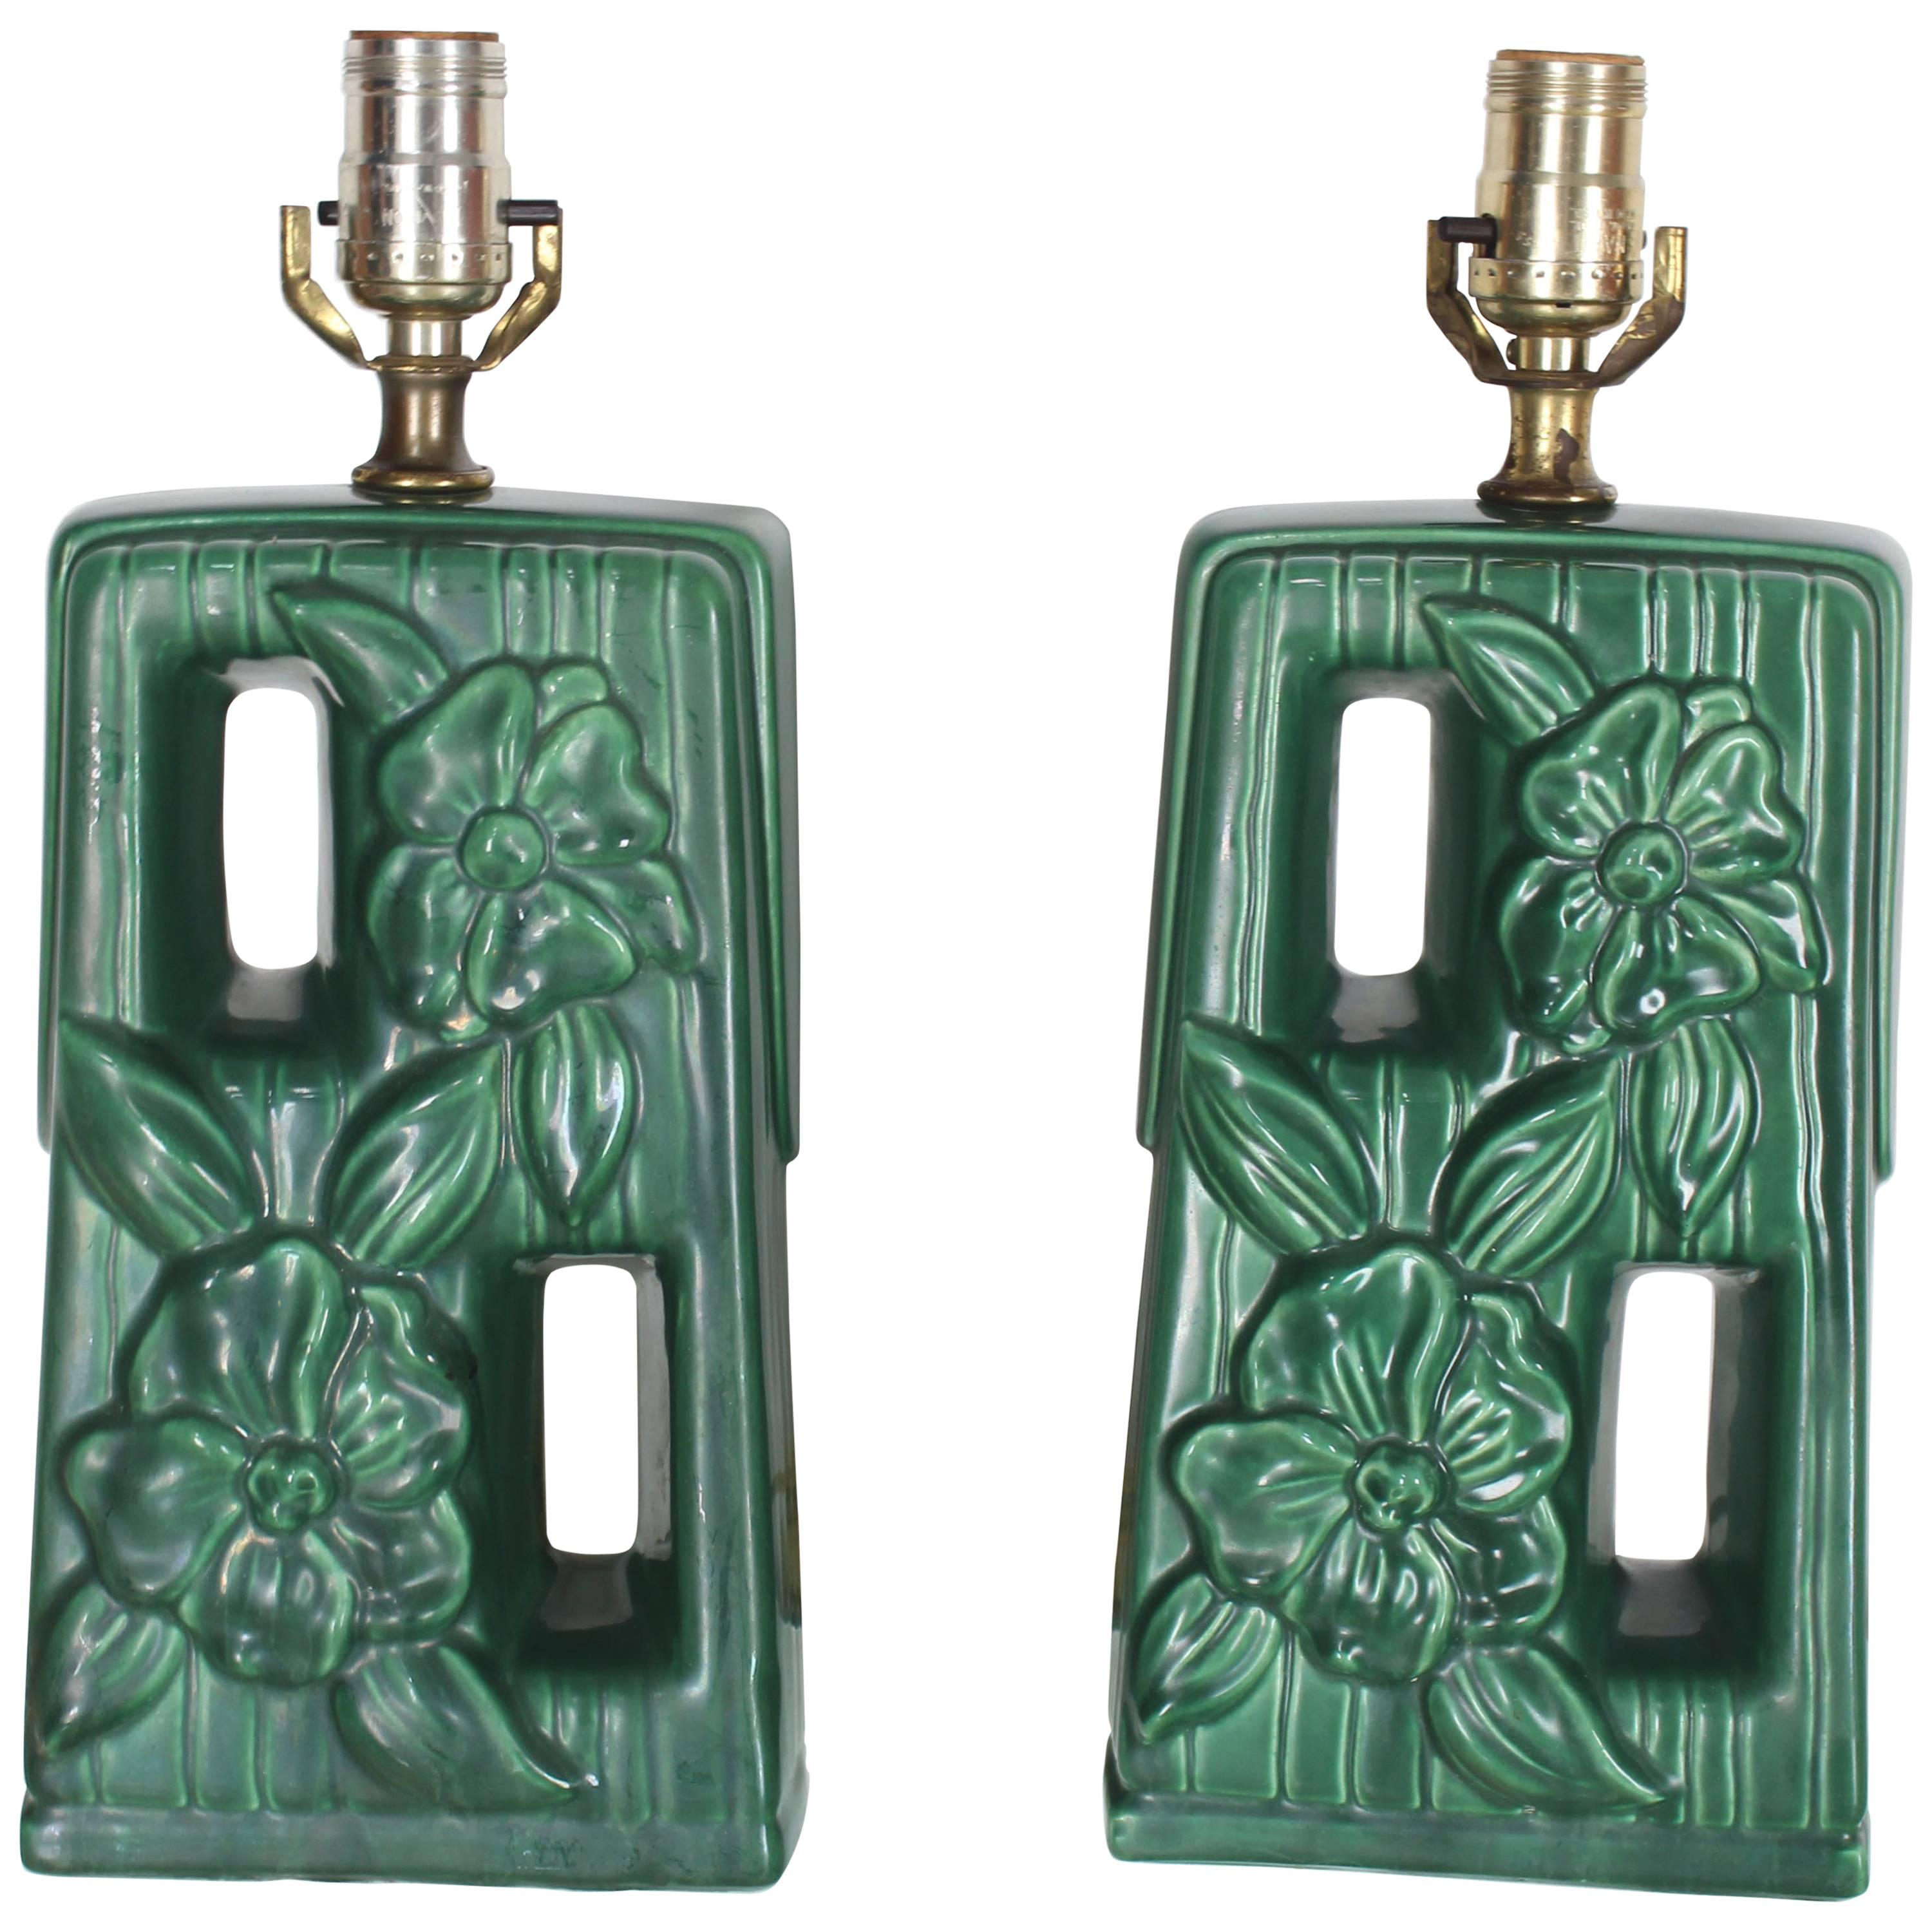 Pair of Green Glazed Pottery Ceramic Table Lamps with Floral Motif